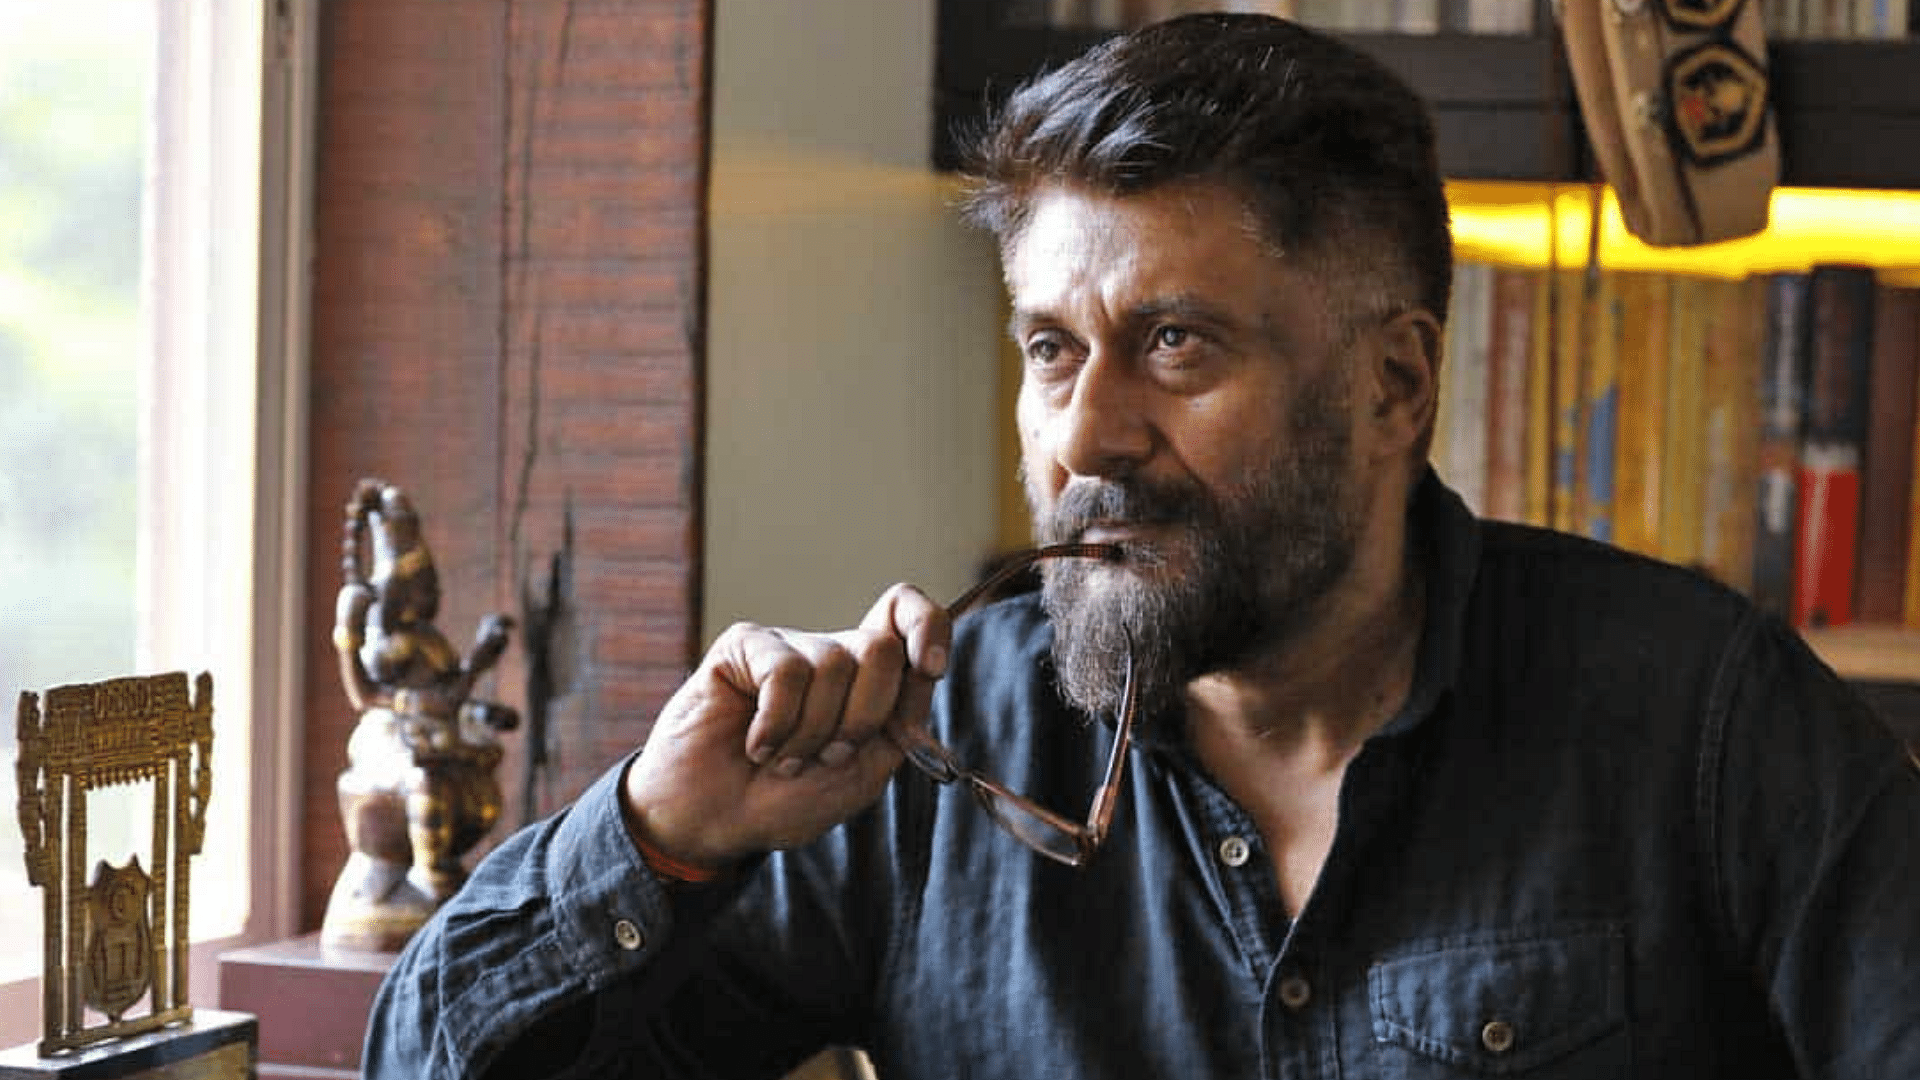 The Kashmir Files' Director Vivek Agnihotri Criticised for 'Bhopali Means  Homosexual' Comment